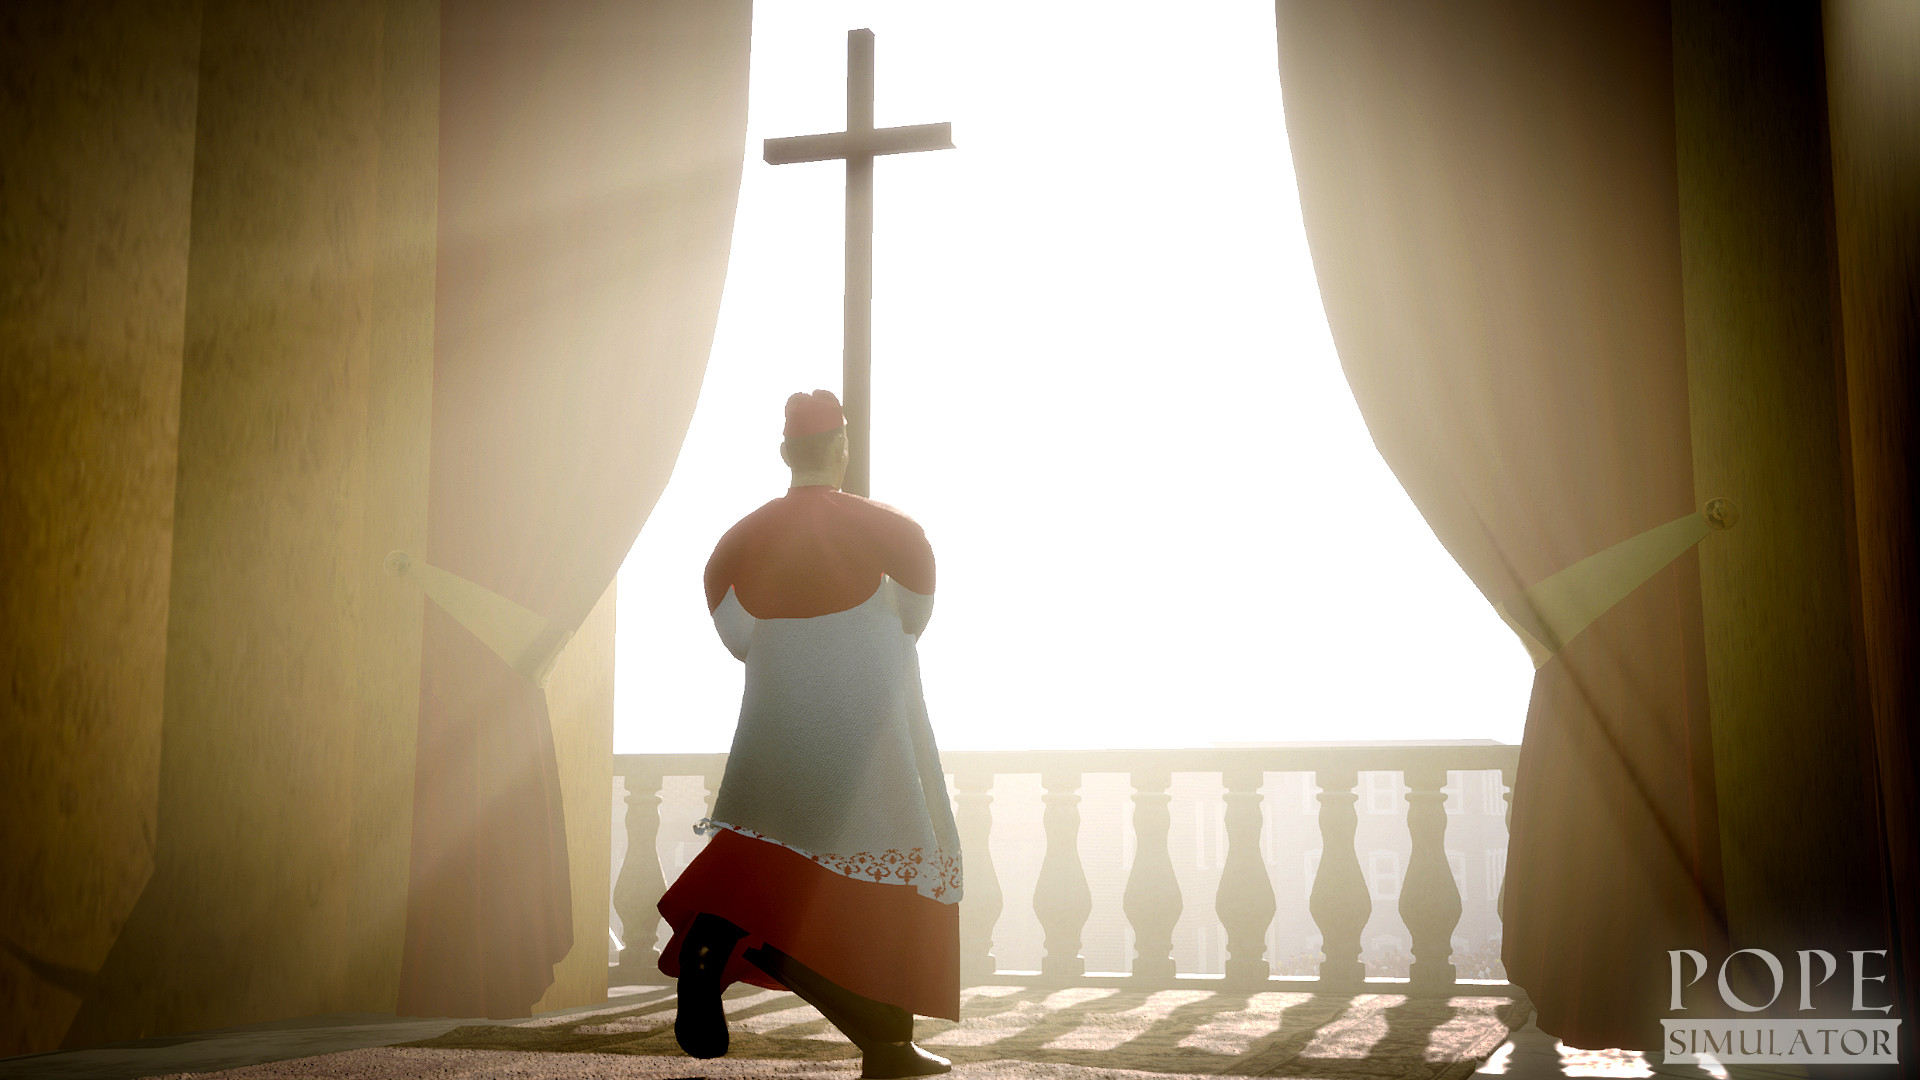 Pope Simulator promises a 'realistic' depiction of life as the Supreme Pontiff